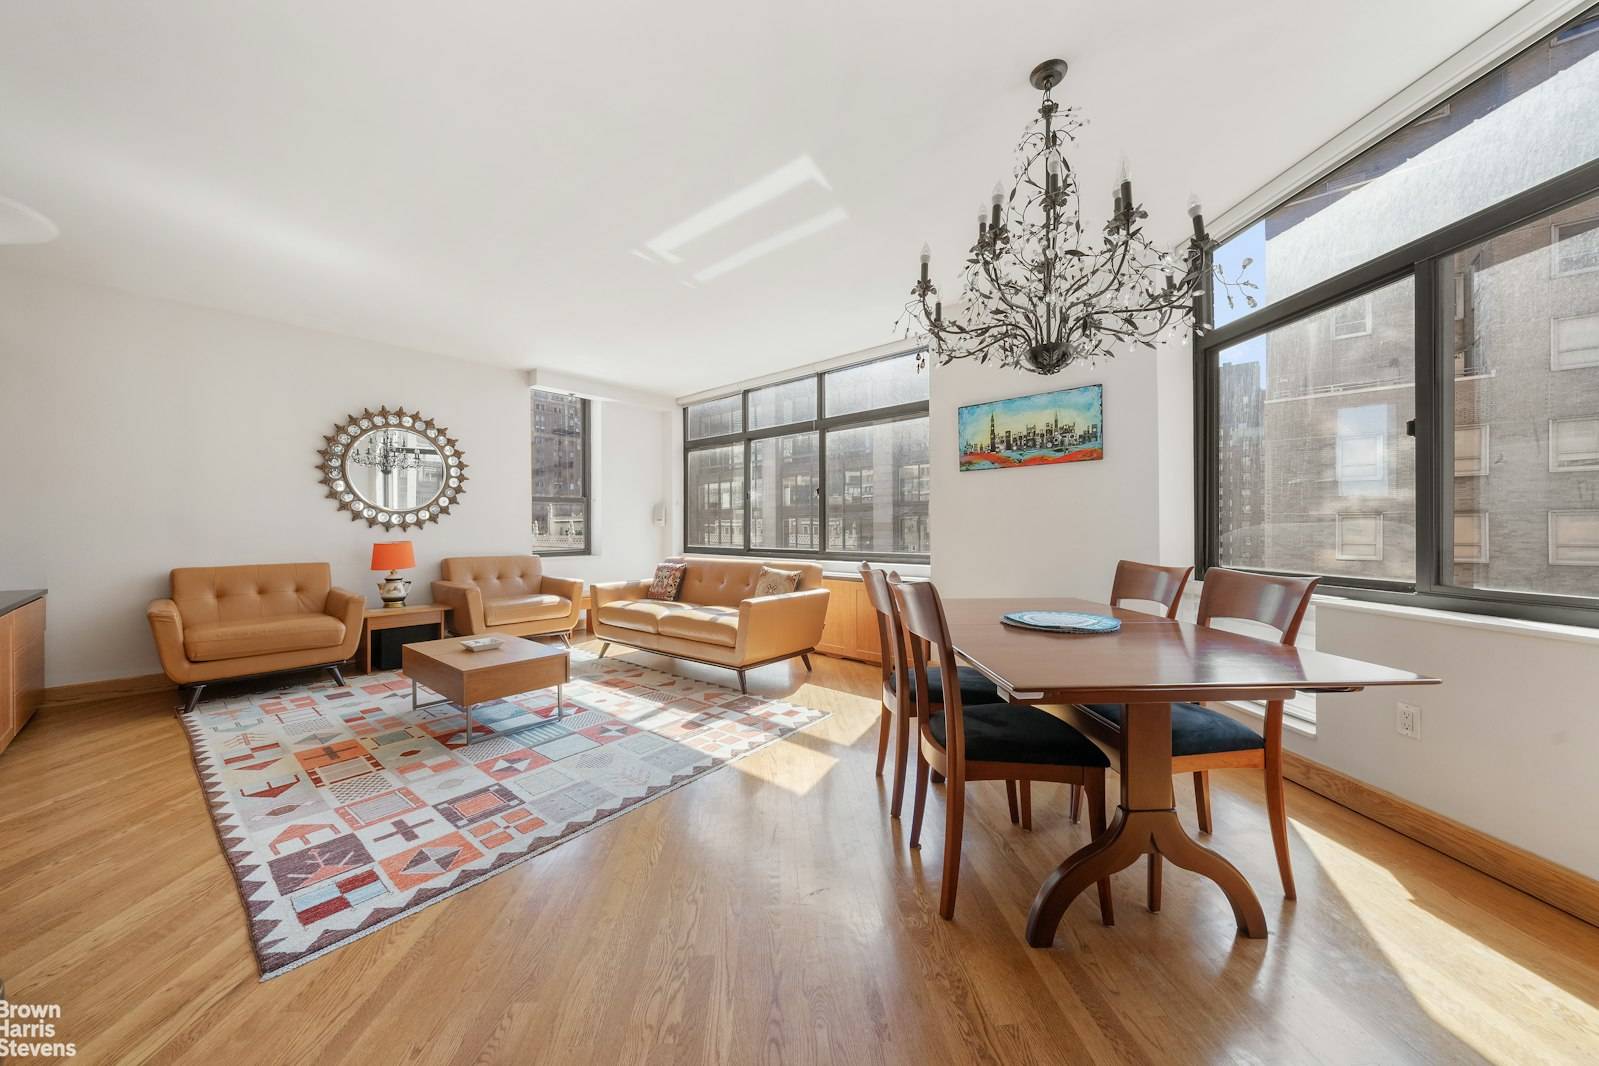 Stunning 2BR 2BTH Condo in the Heart of Midtown ManhattanThis stunning 2BR 2BTH condominium, perched on the 10th floor, offers everything the savvy buyer desires in a New York City ...